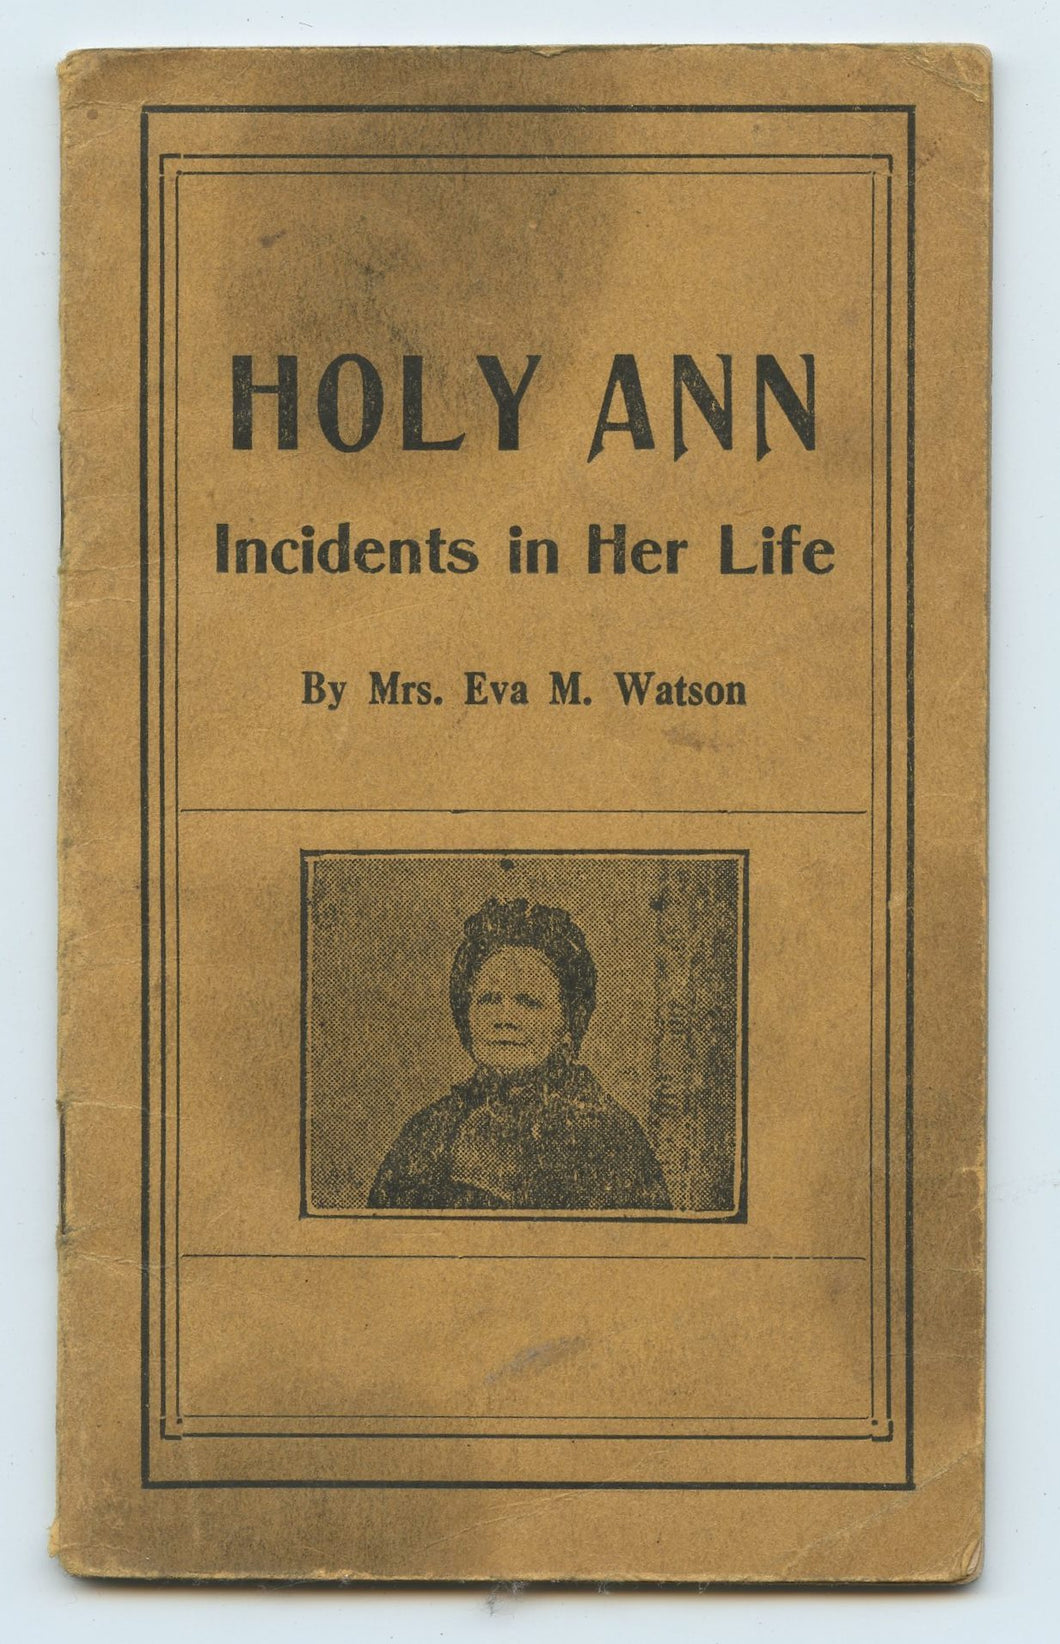 Holy Ann: Incidents in Her Life